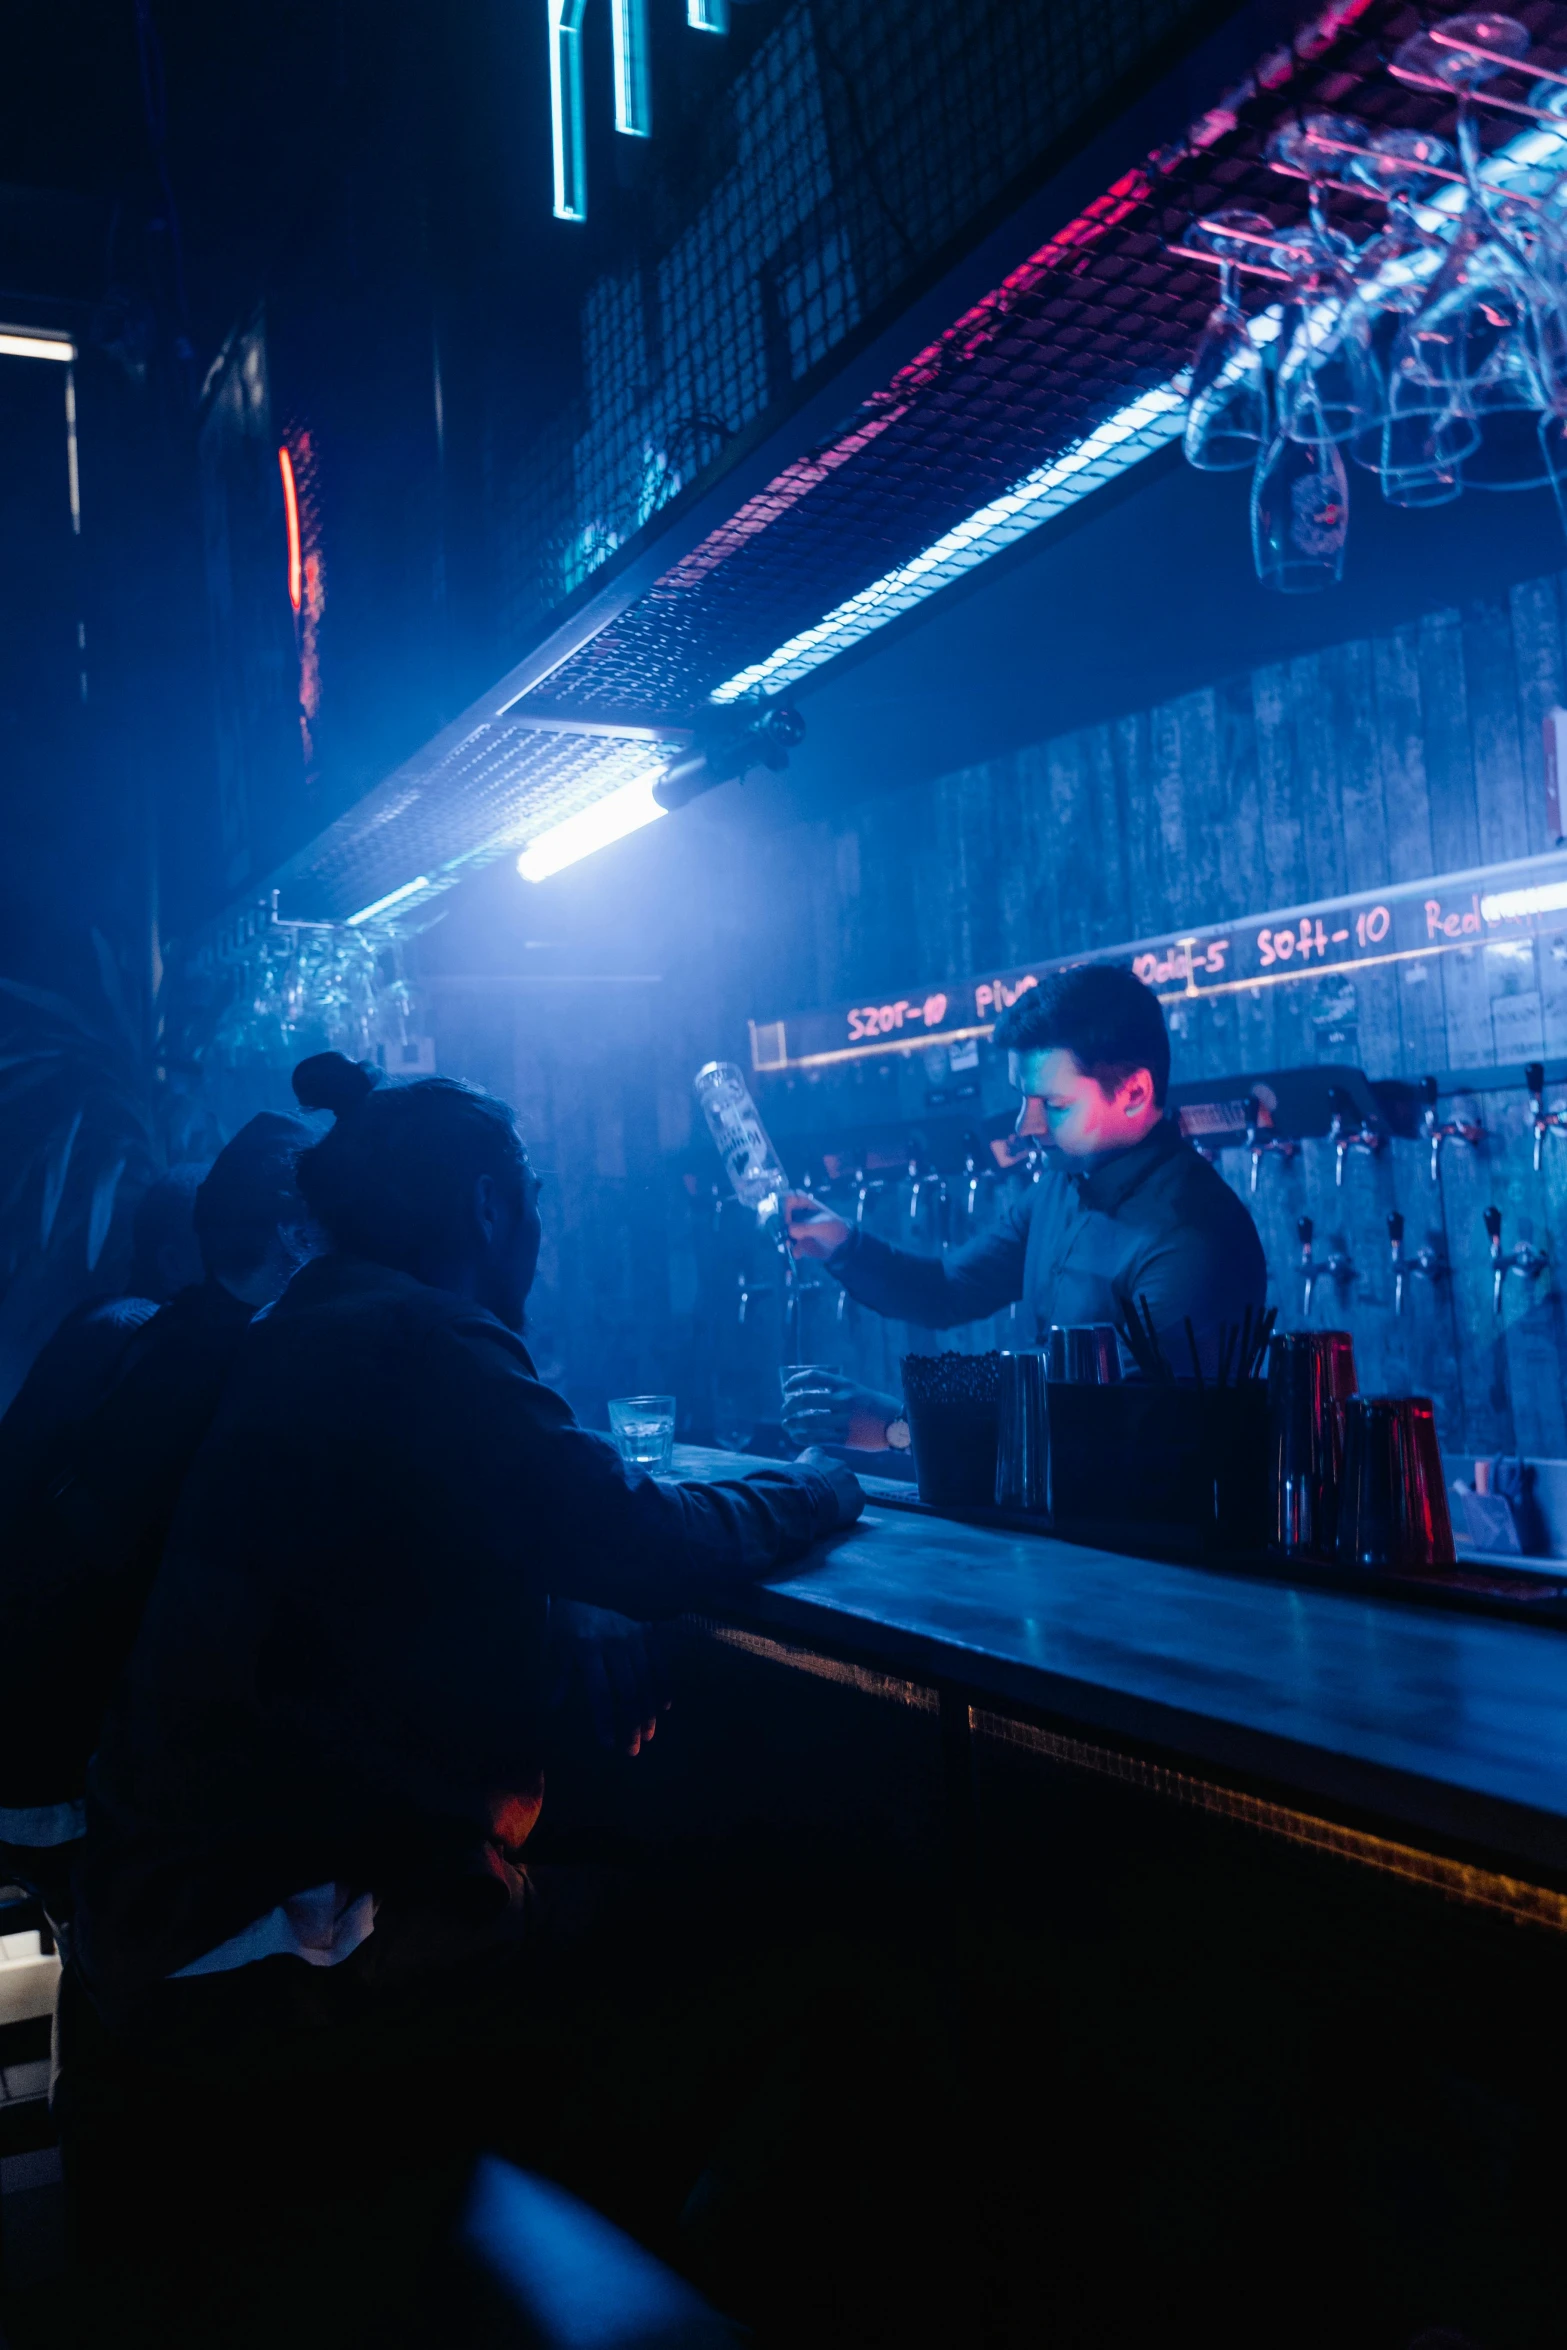 a group of people sitting at a bar, dystopian lighting, cold beer, scene from a rave, slightly minimal